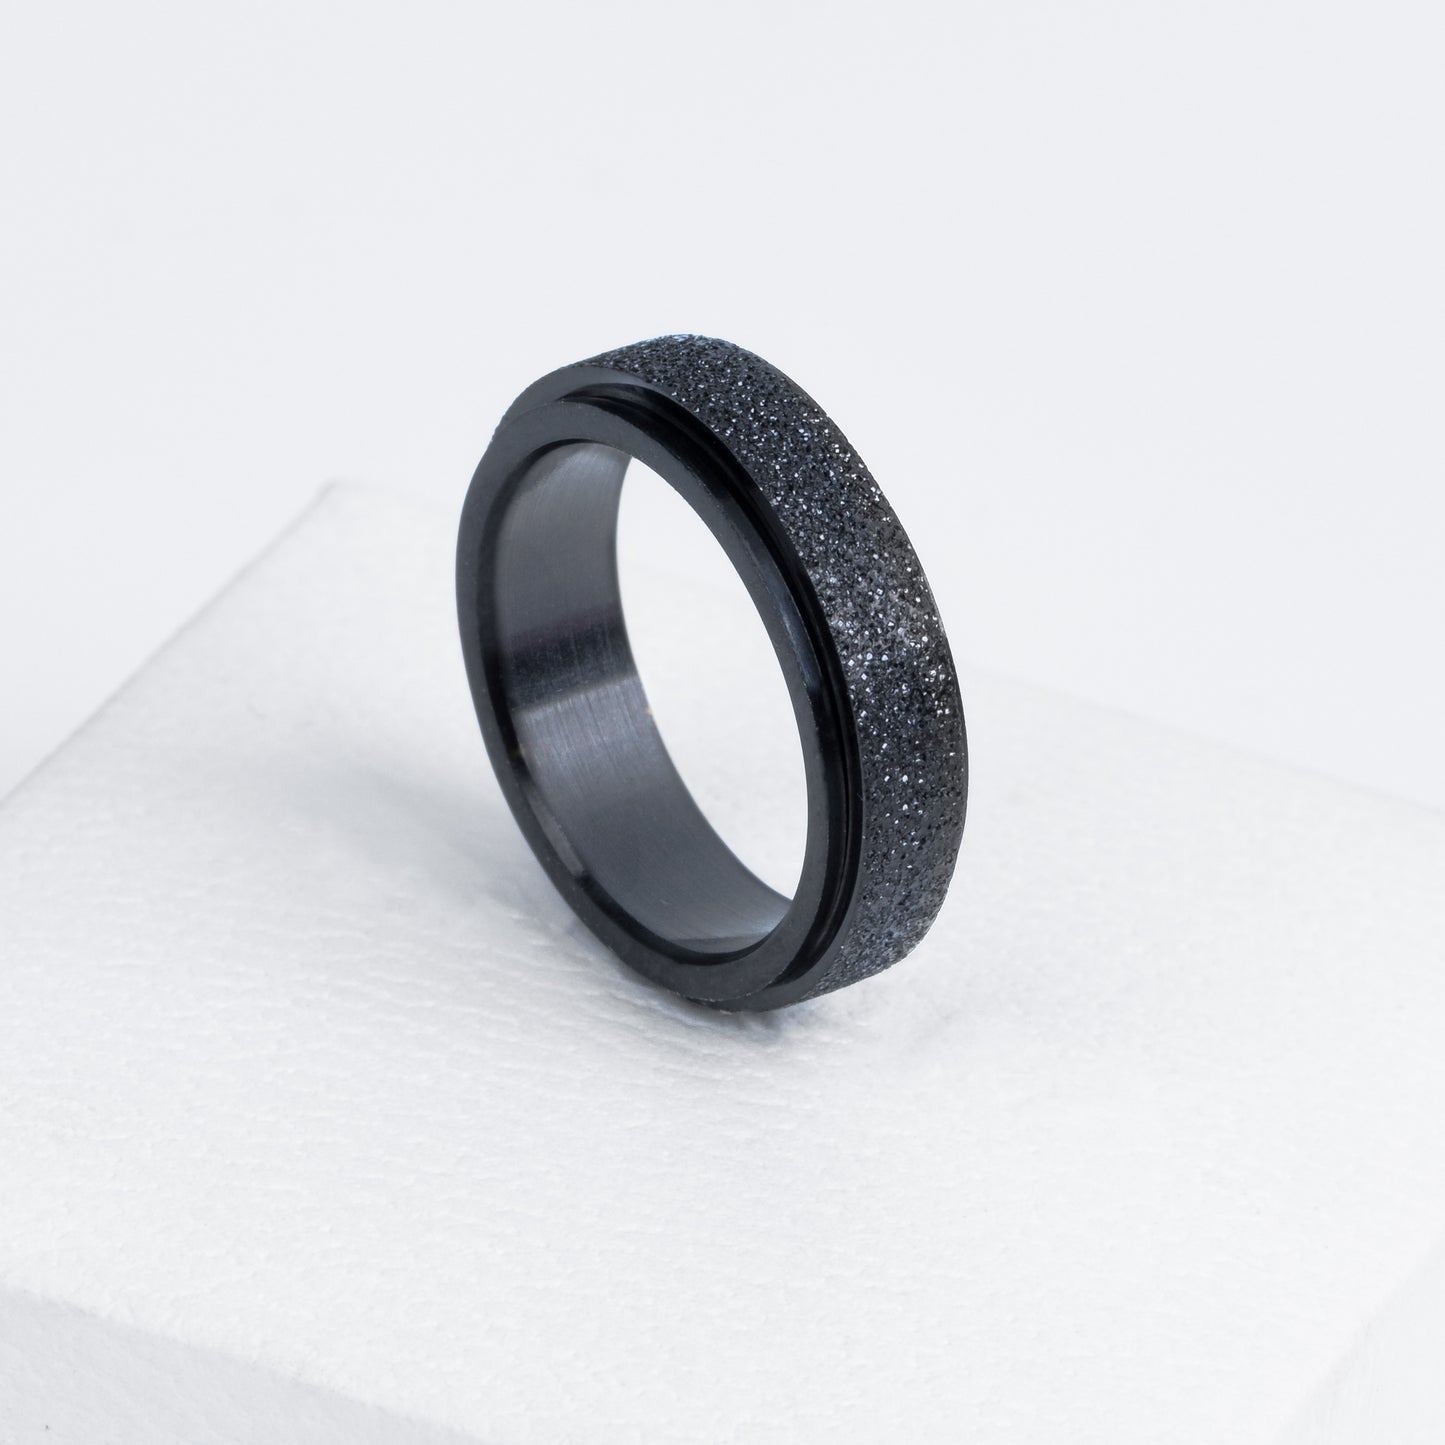 Sparkly Black Anxiety Ring